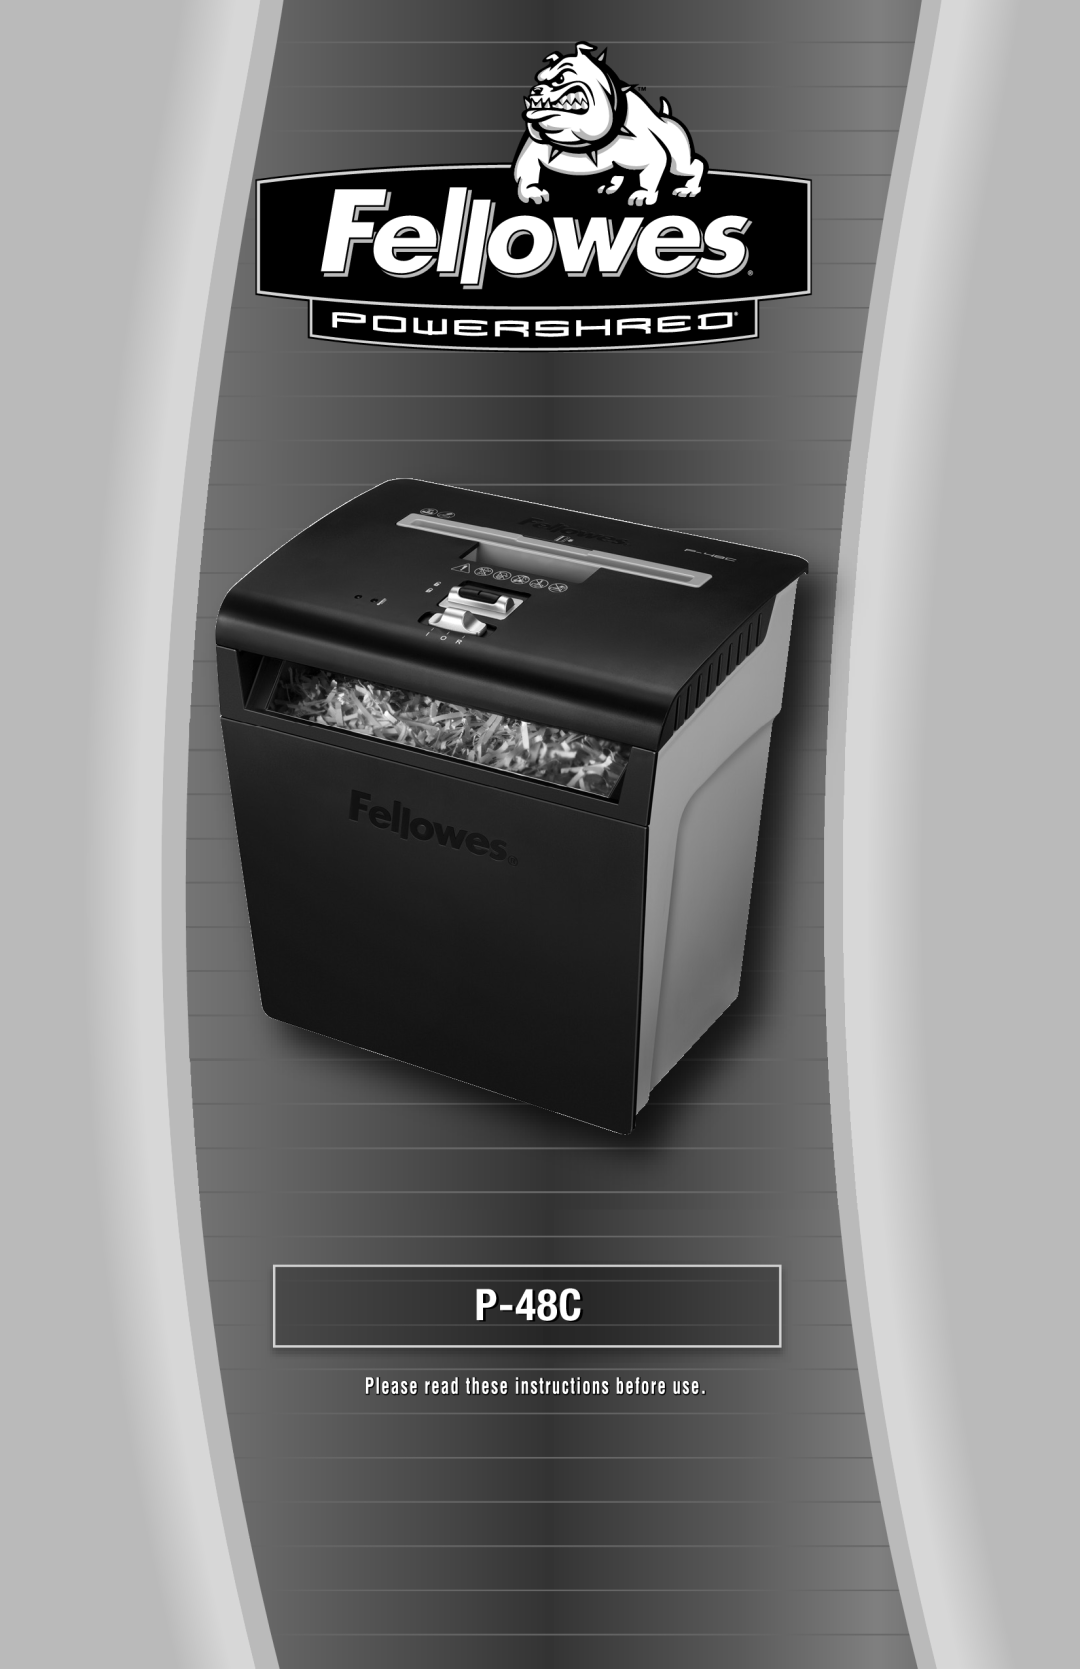 Fellowes manual POWERSHRED P-48C, Quality Office Products Since 